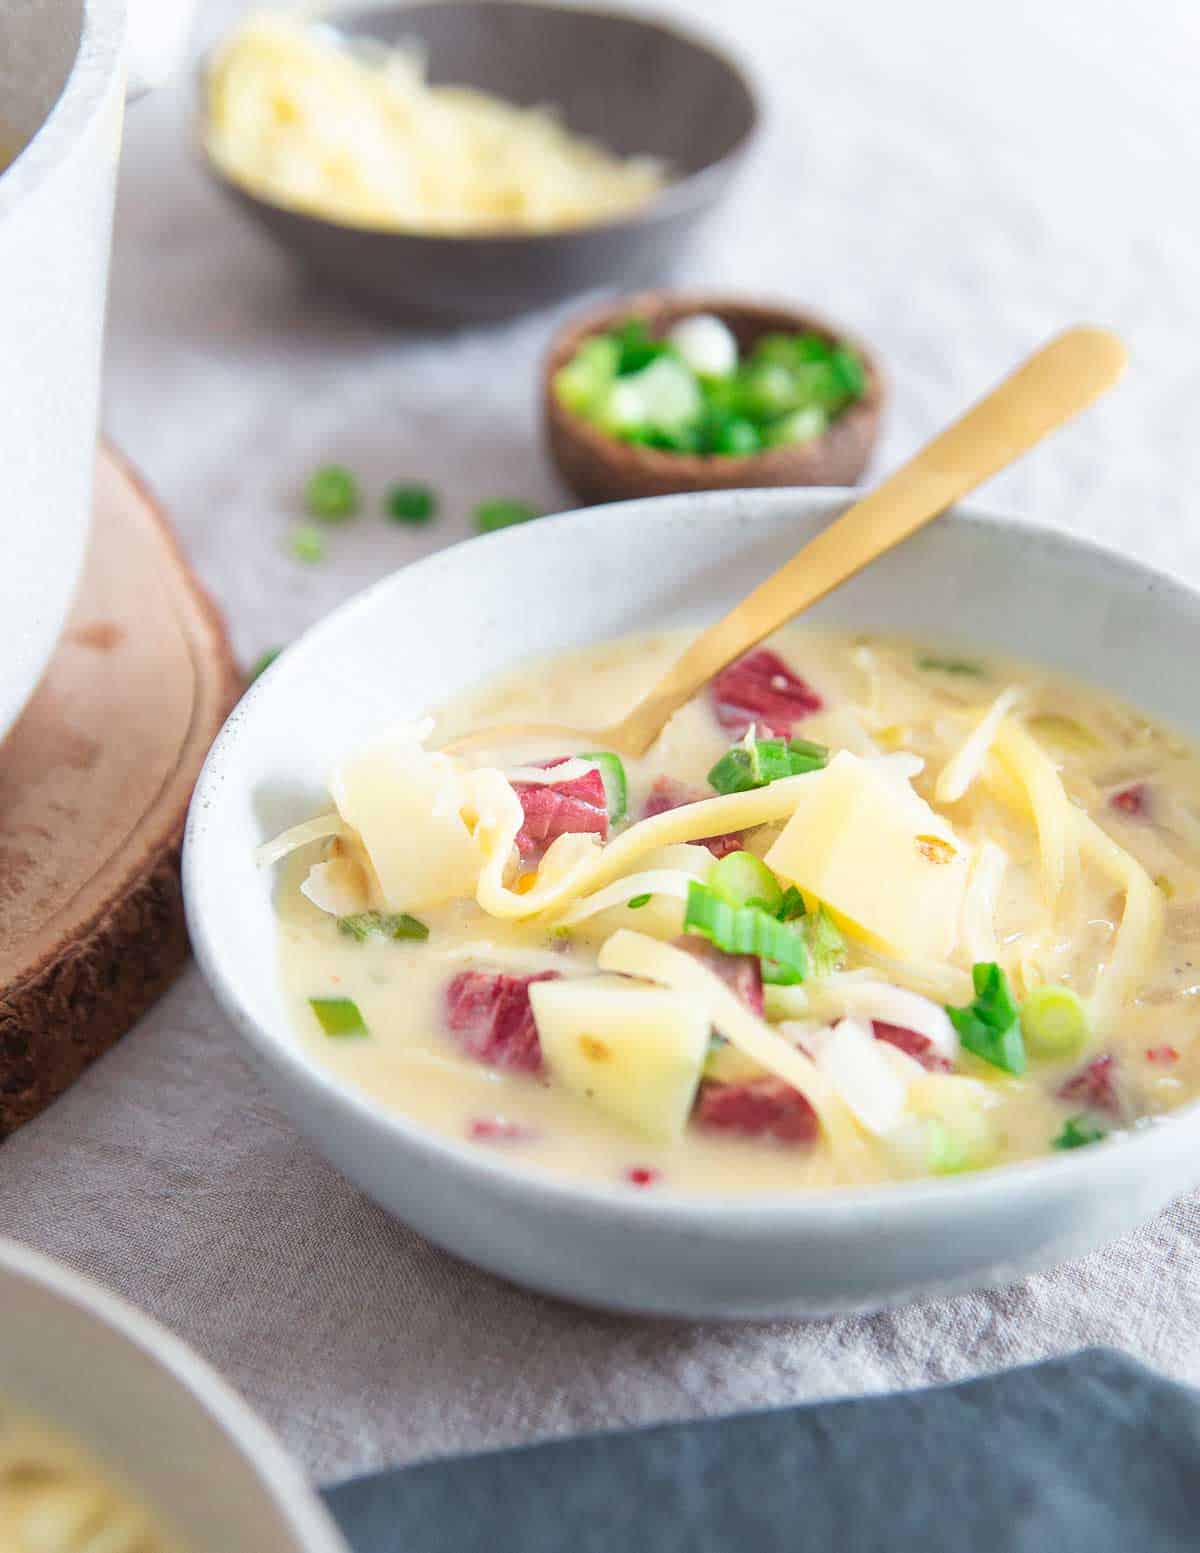 This Reuben soup with potatoes takes all the classic flavors of the sandwich and turns it into a creamy, delicious soup.